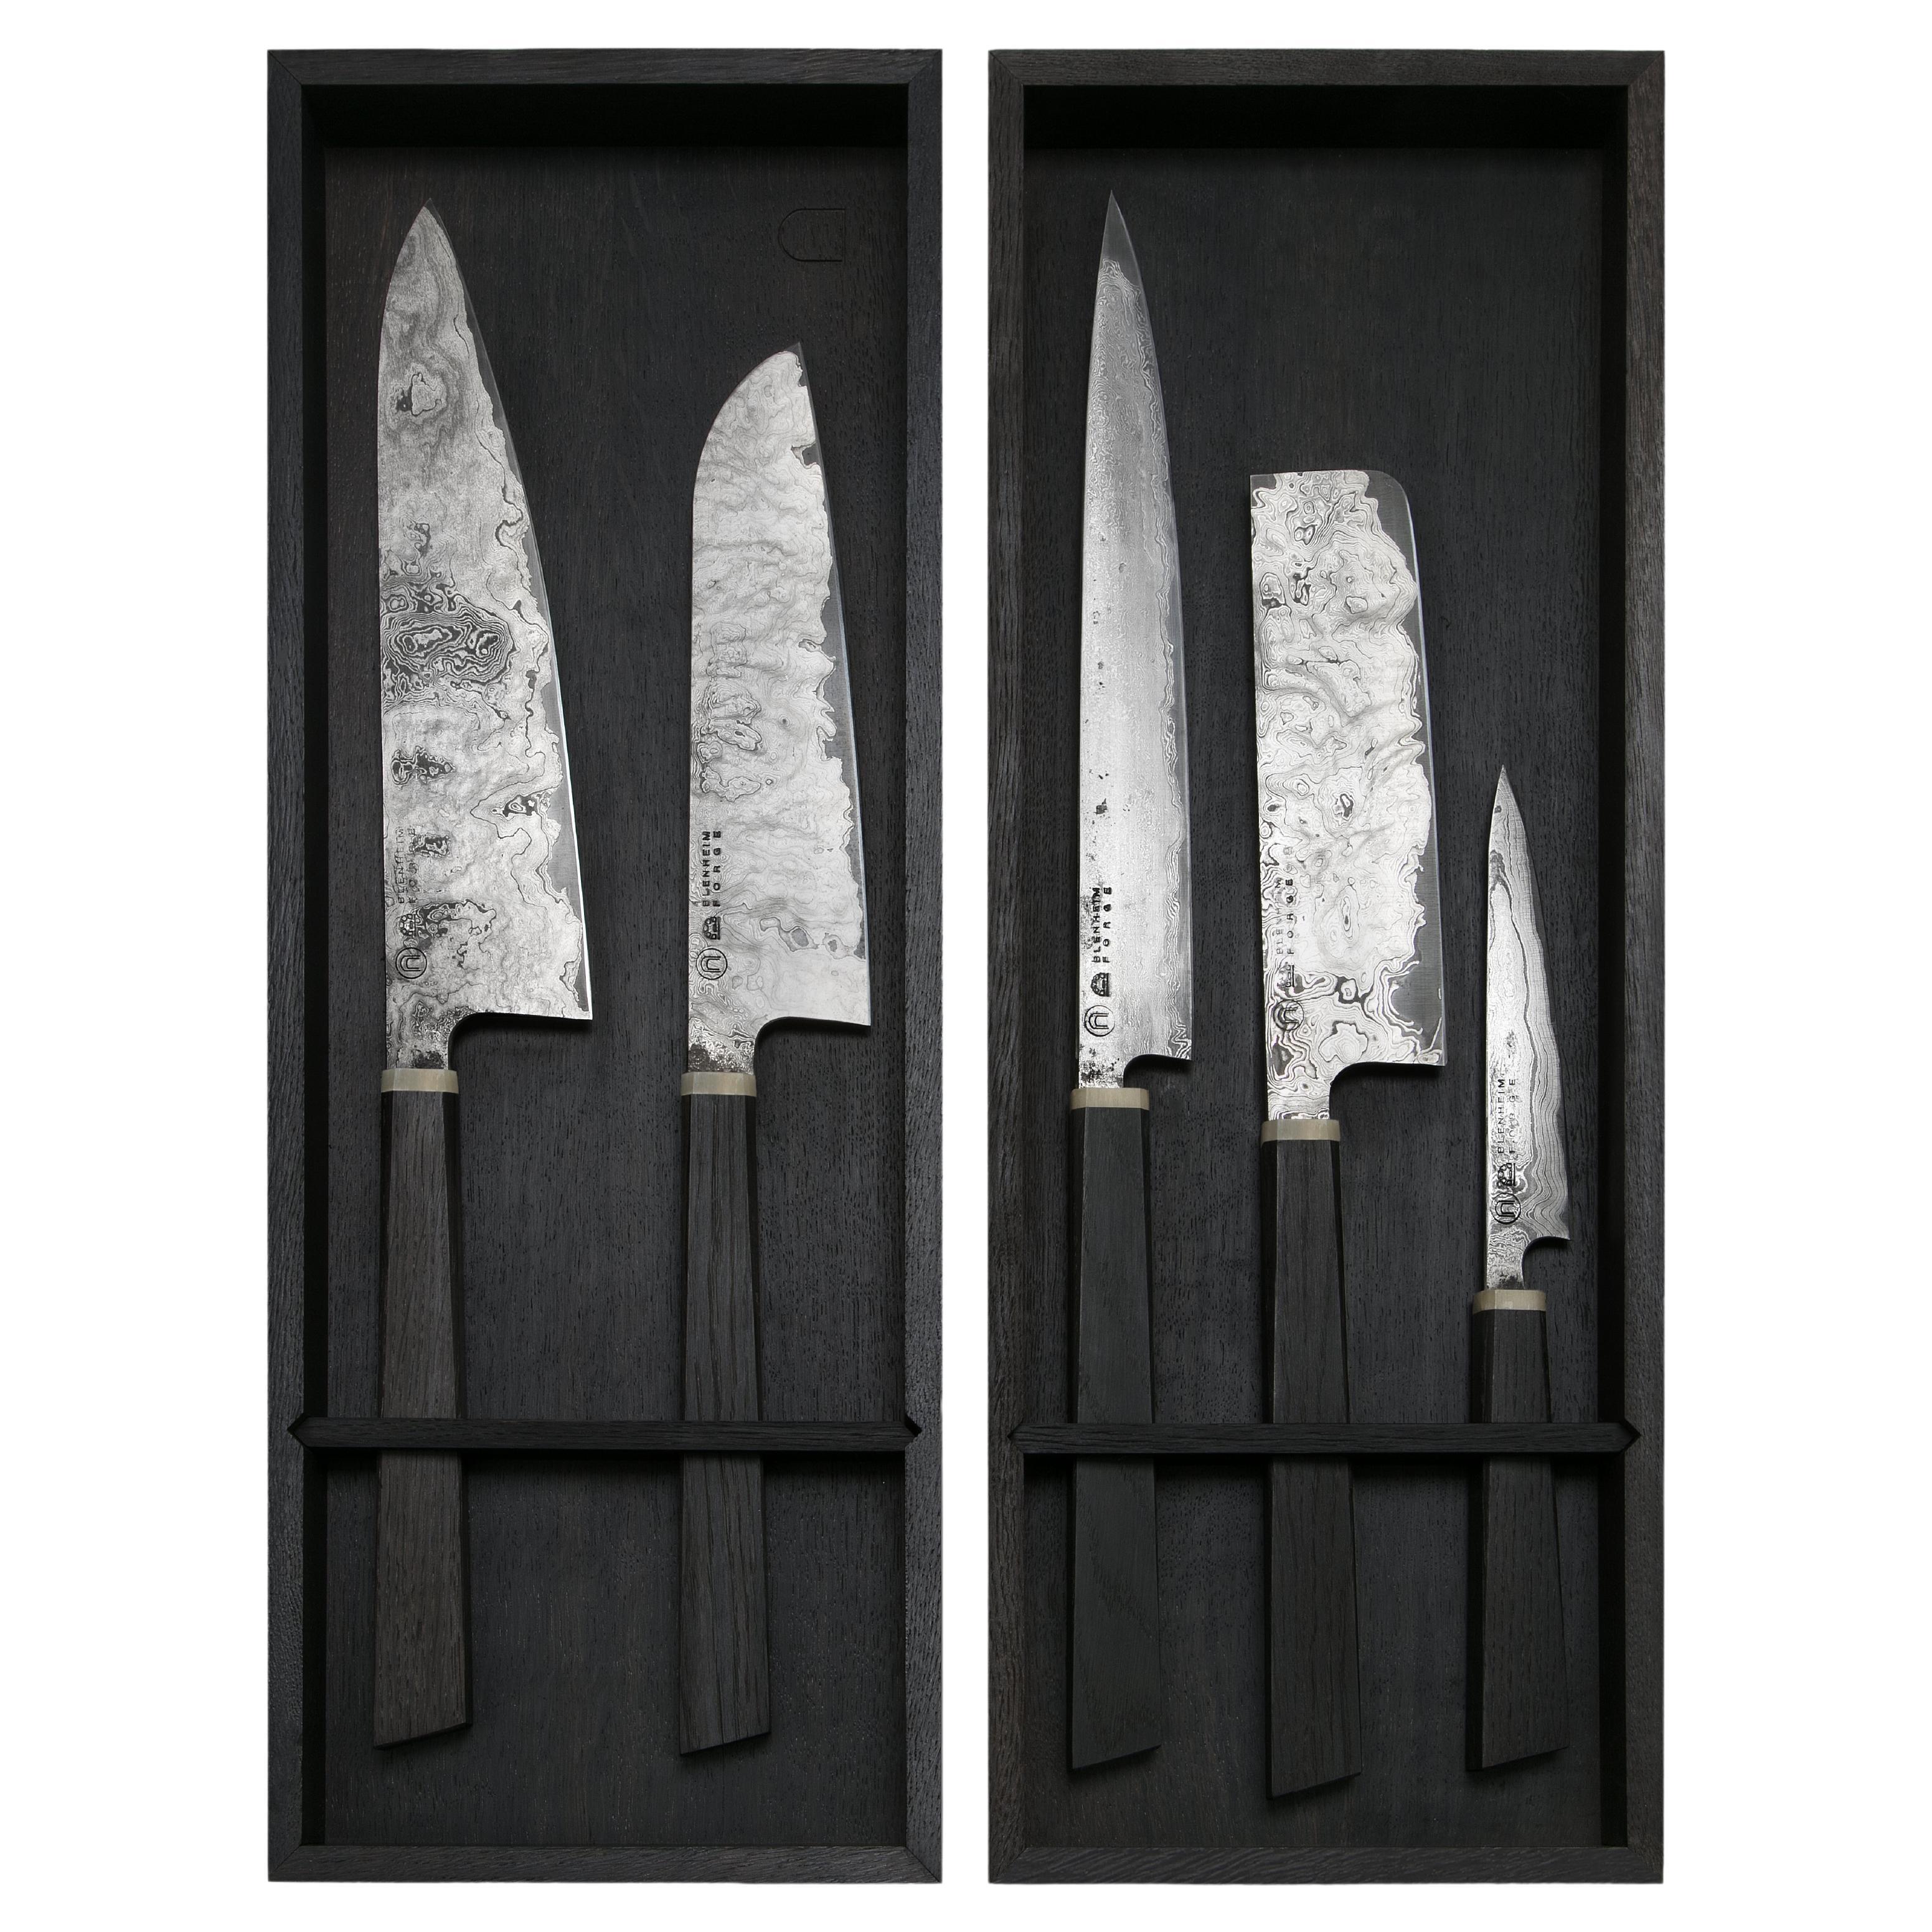 Five Damascus Steel Knife Set with 3000-5000 Year-Old Bog-Oak Display Box For Sale